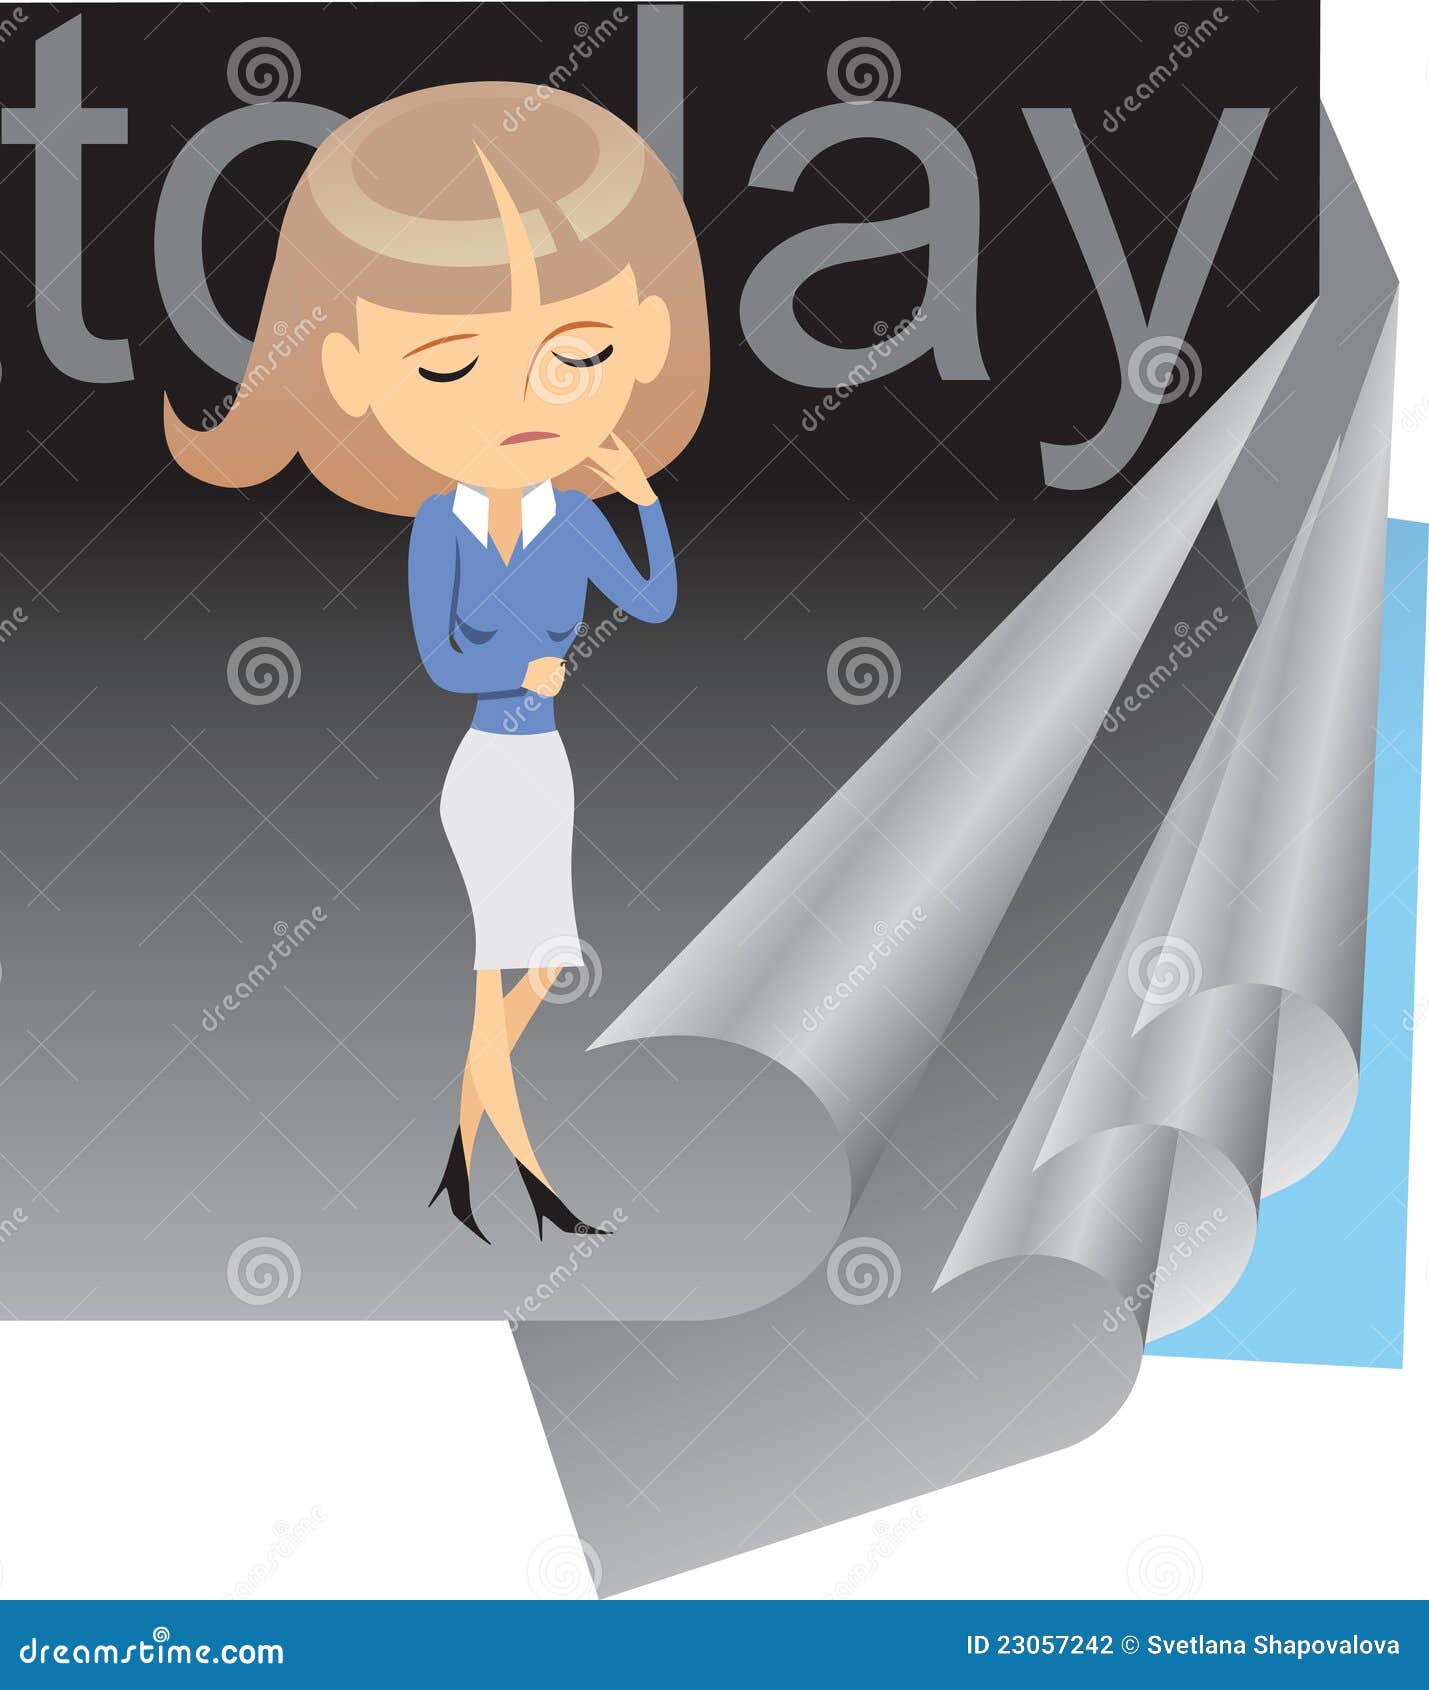 Depression character stock vector. Illustration of woman - 23057242